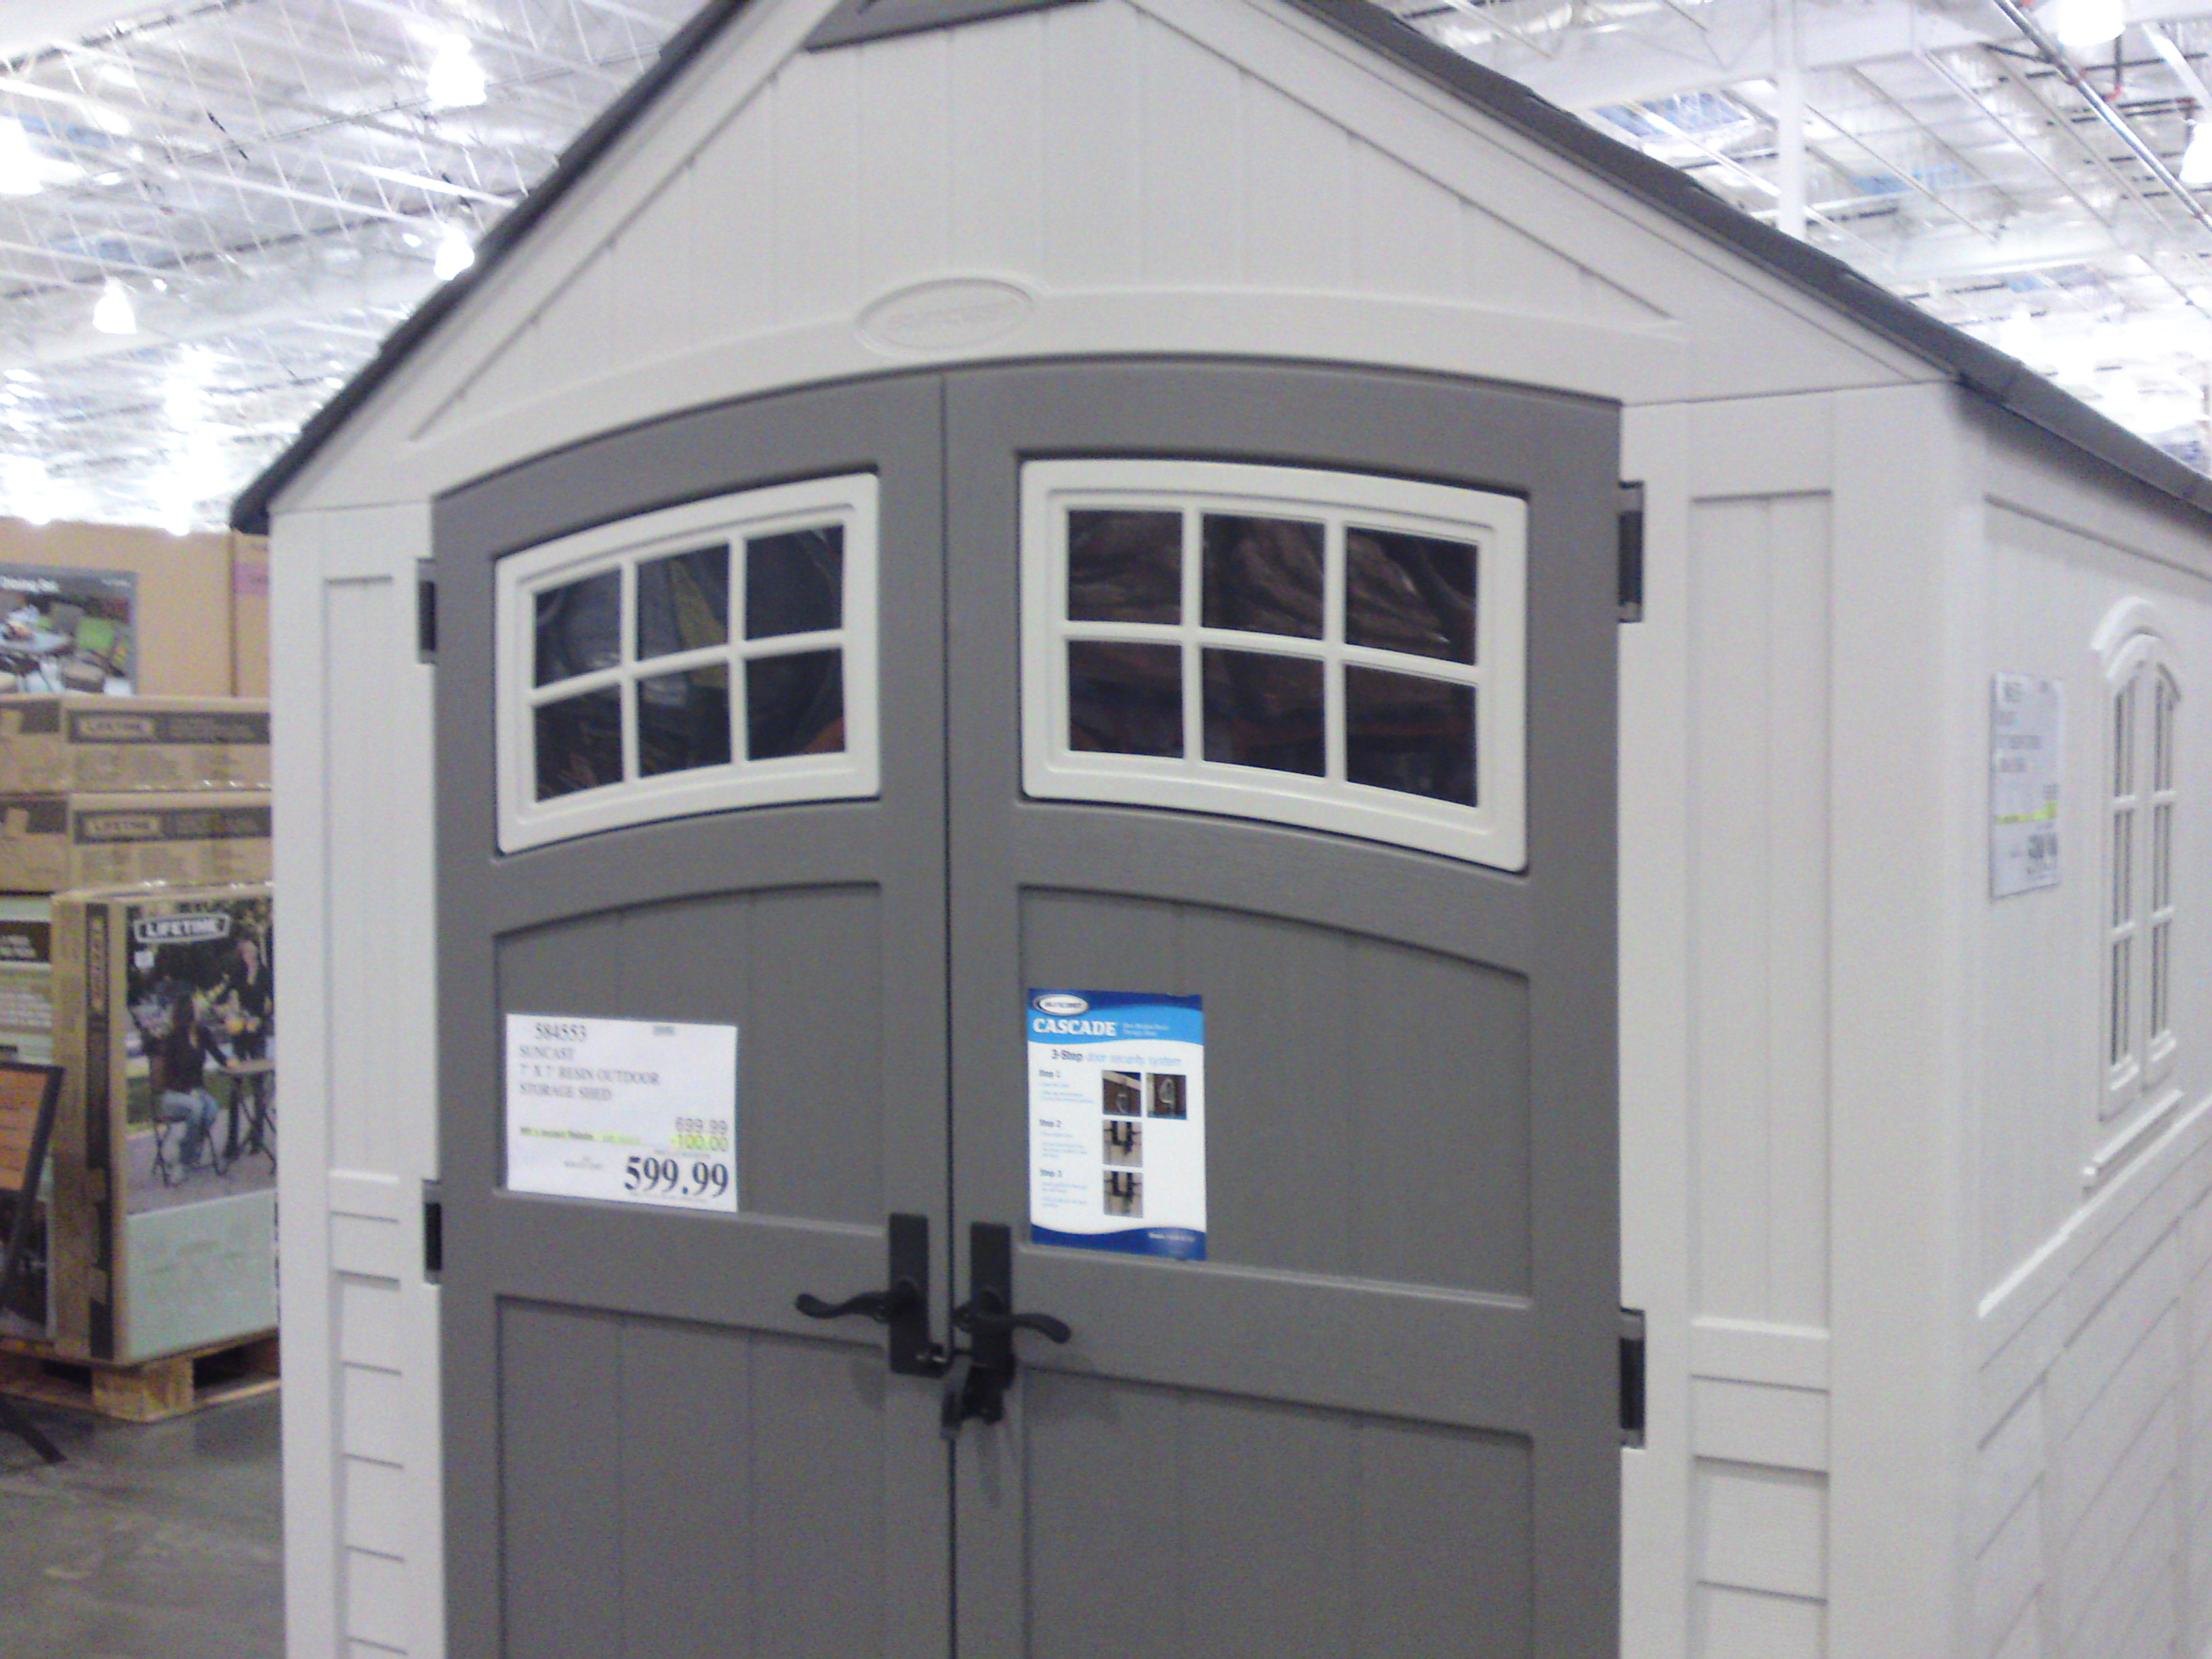 Costco Sale: Suncast 7' x 7' Resin Outdoor Storage Shed $599.99 ...